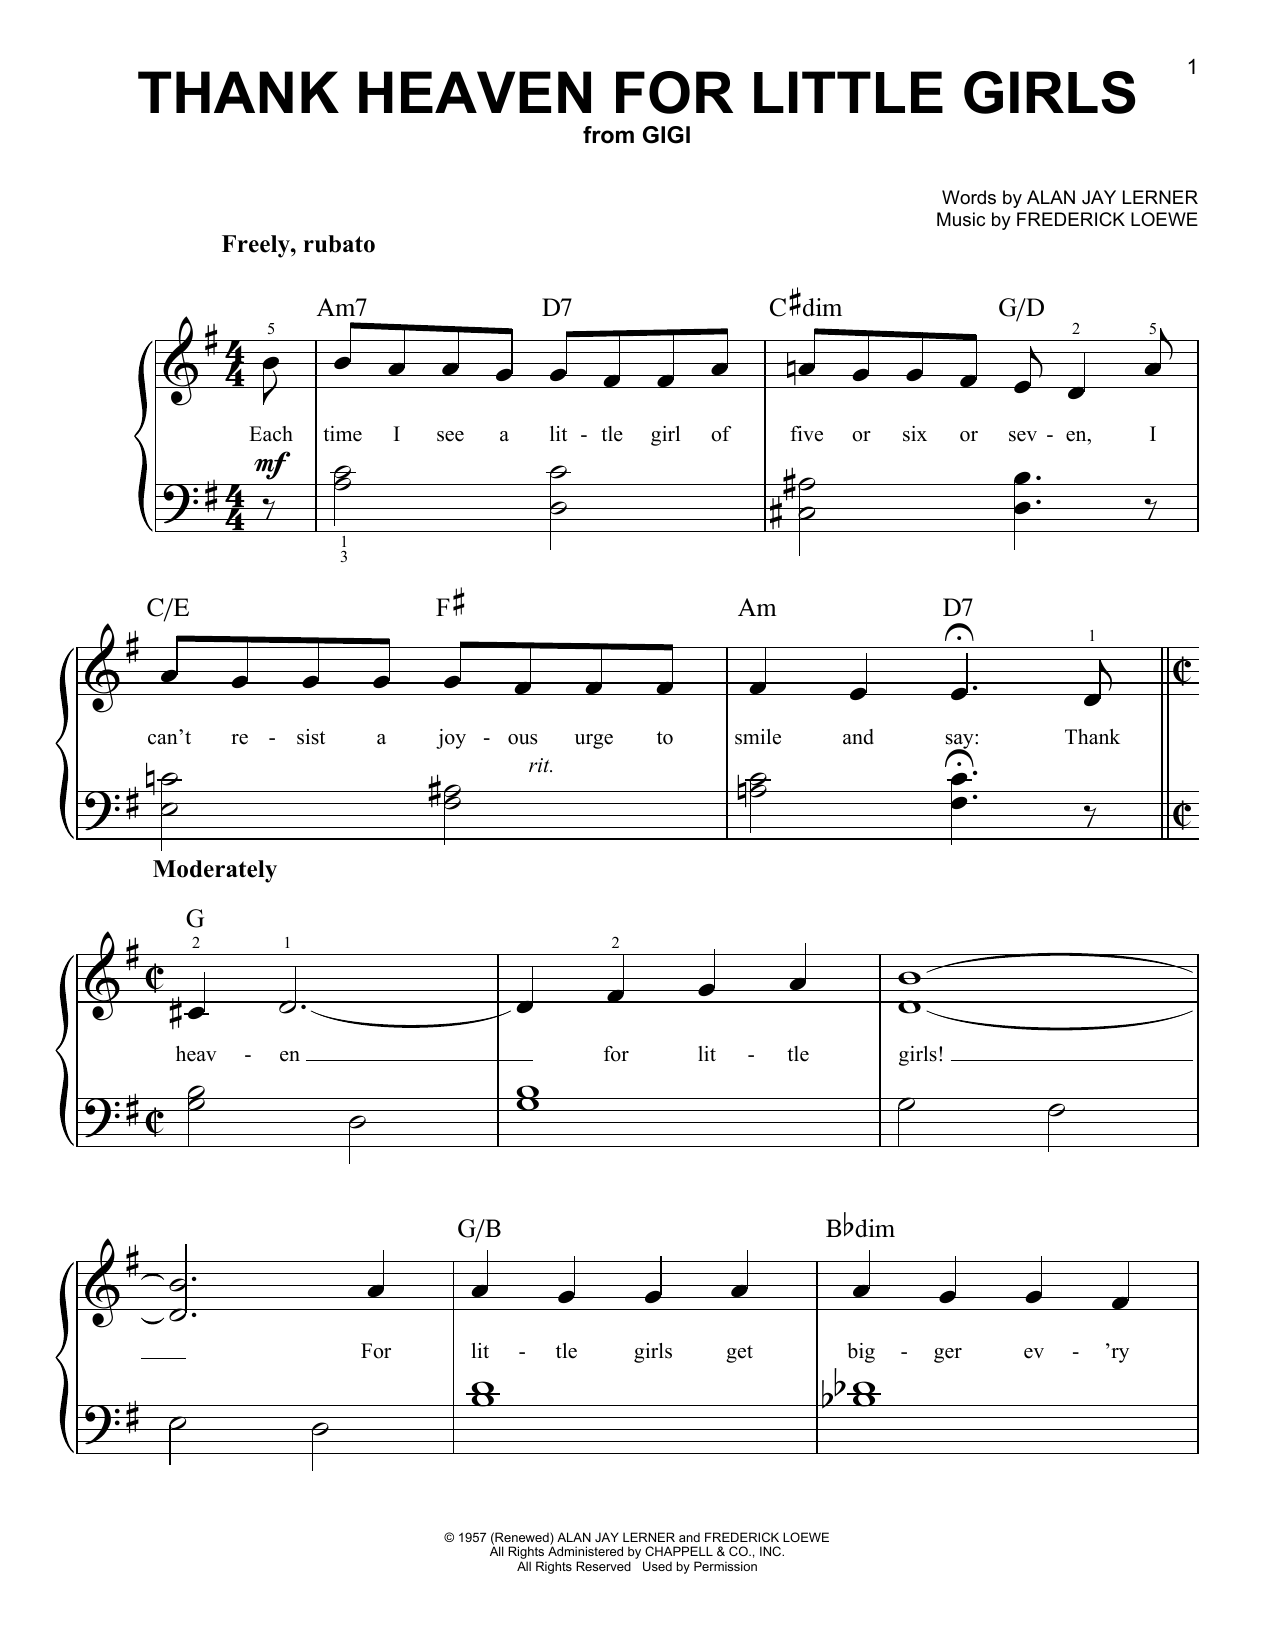 Alan Jay Lerner Thank Heaven For Little Girls sheet music notes and chords. Download Printable PDF.